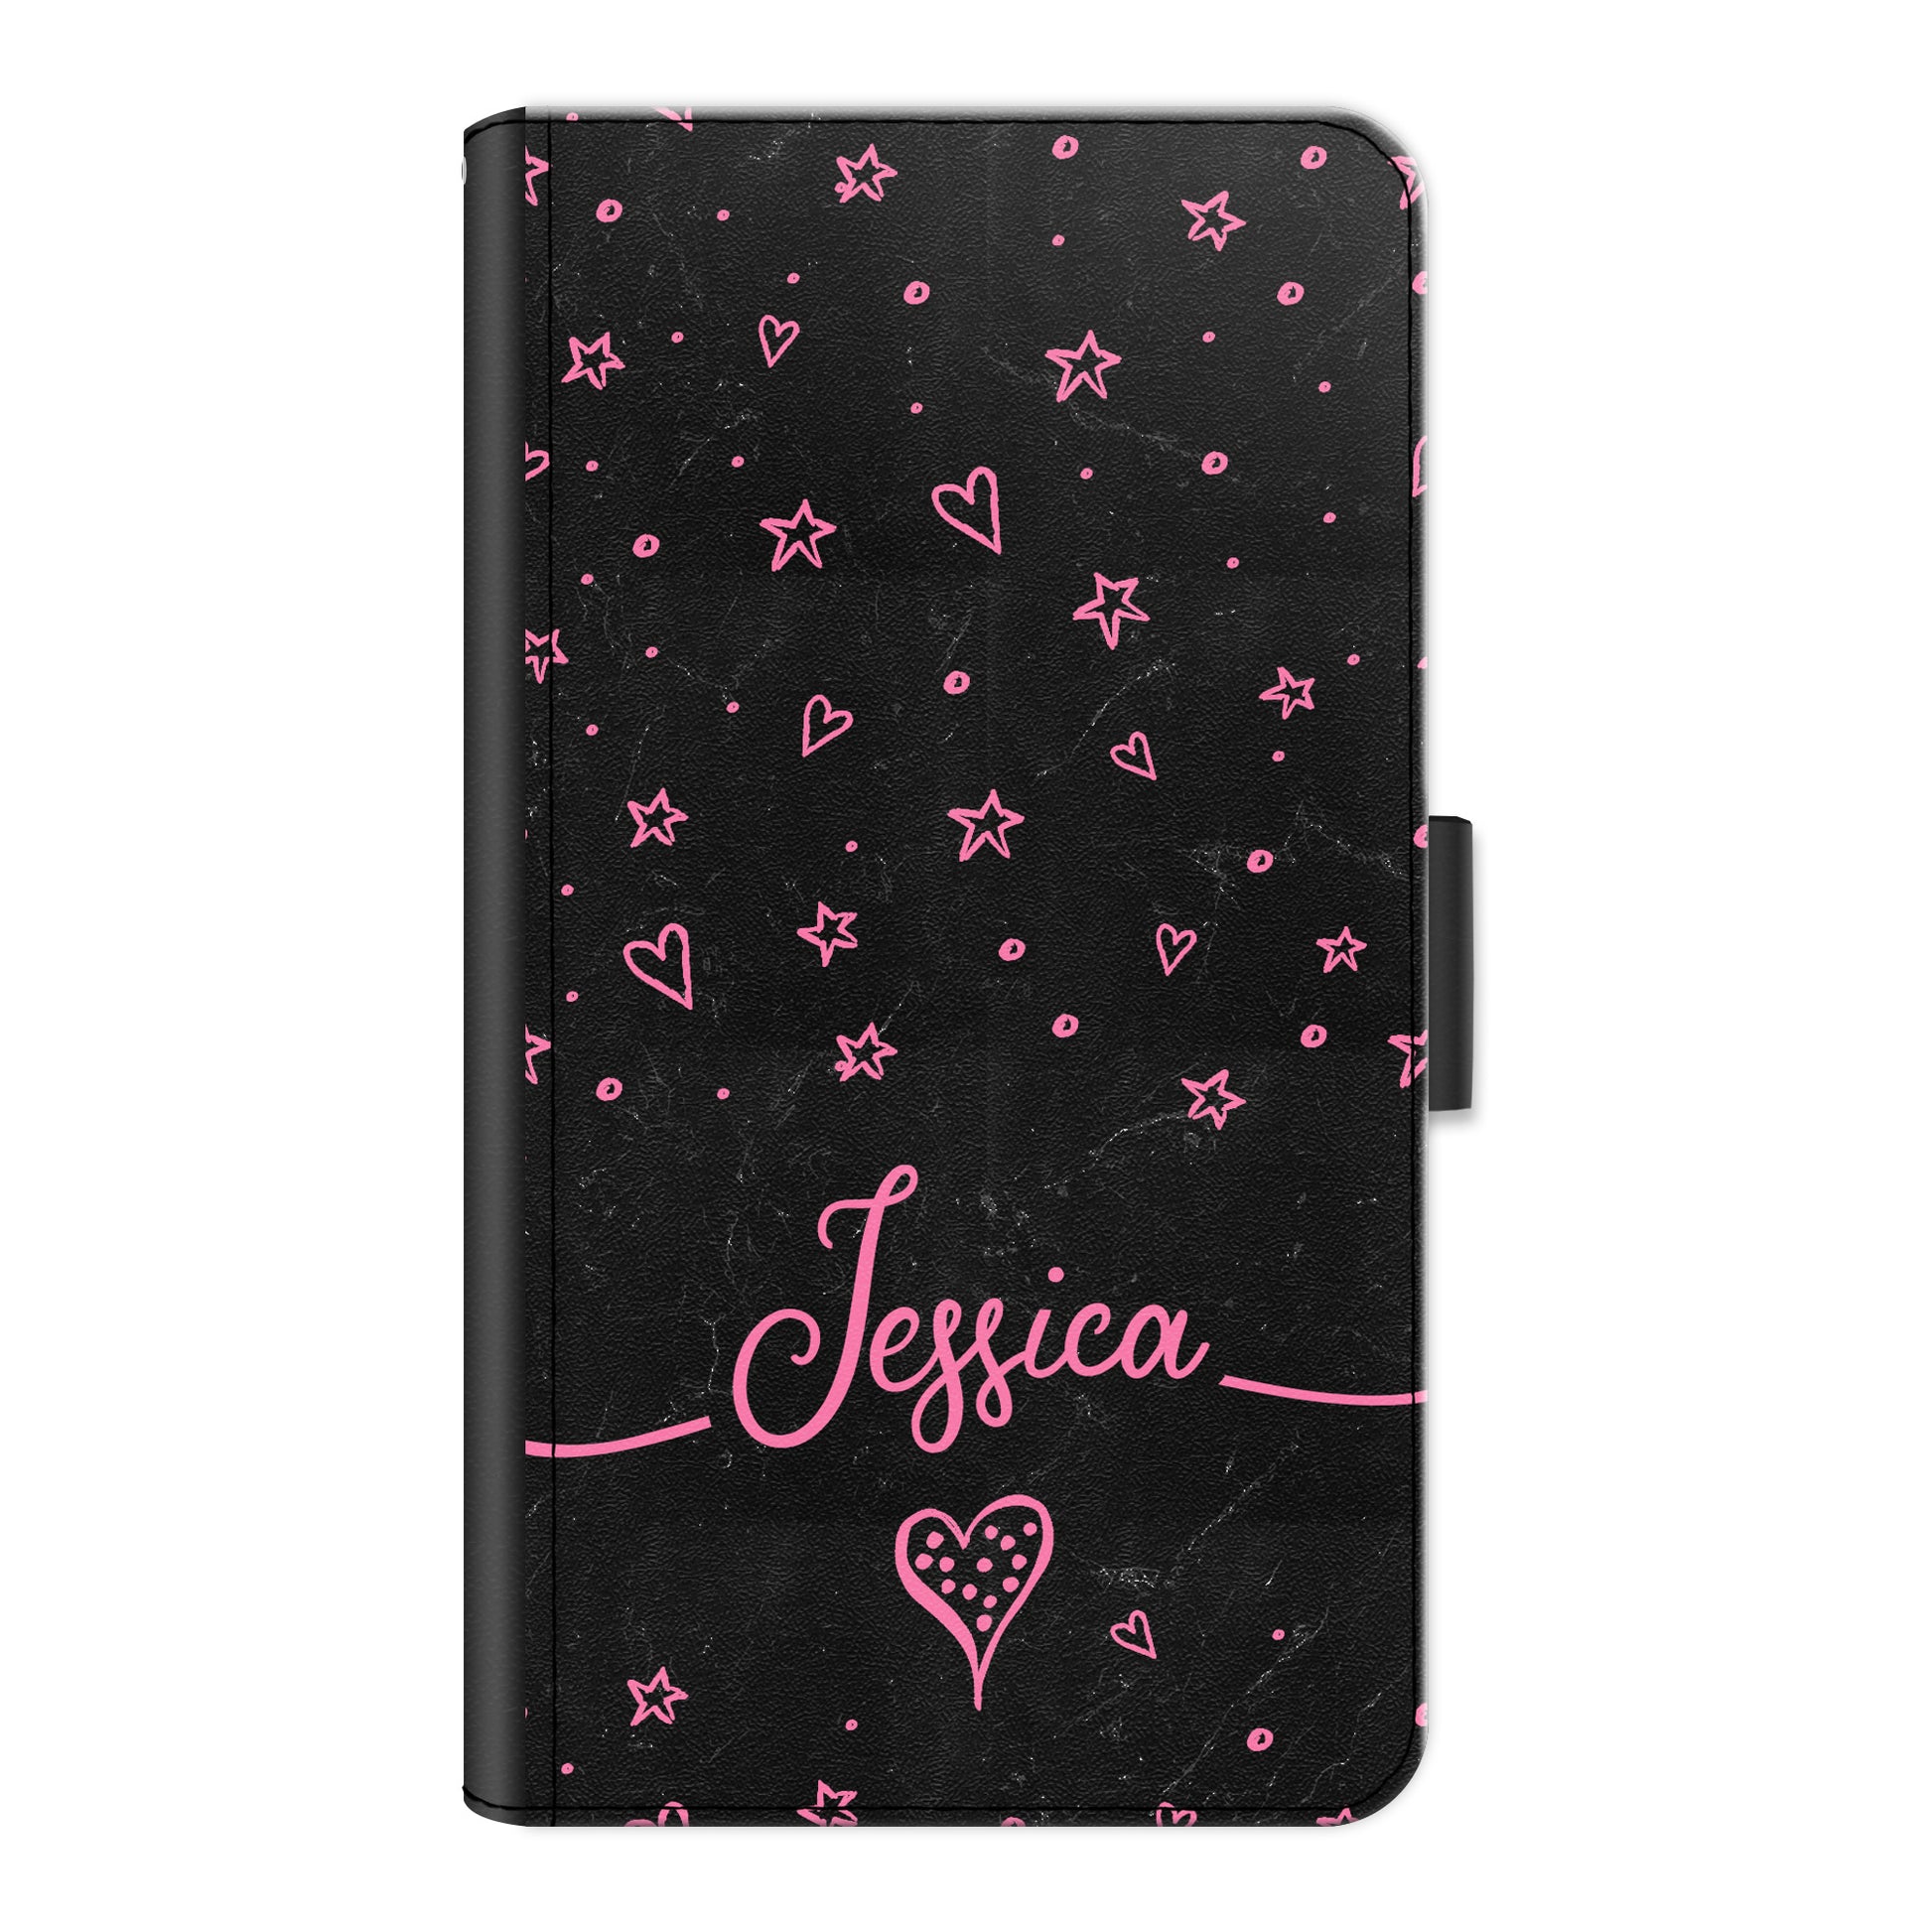 Personalised Nokia Phone Leather Wallet with Pink Stylish text, Stars and Hearts on Black Marble